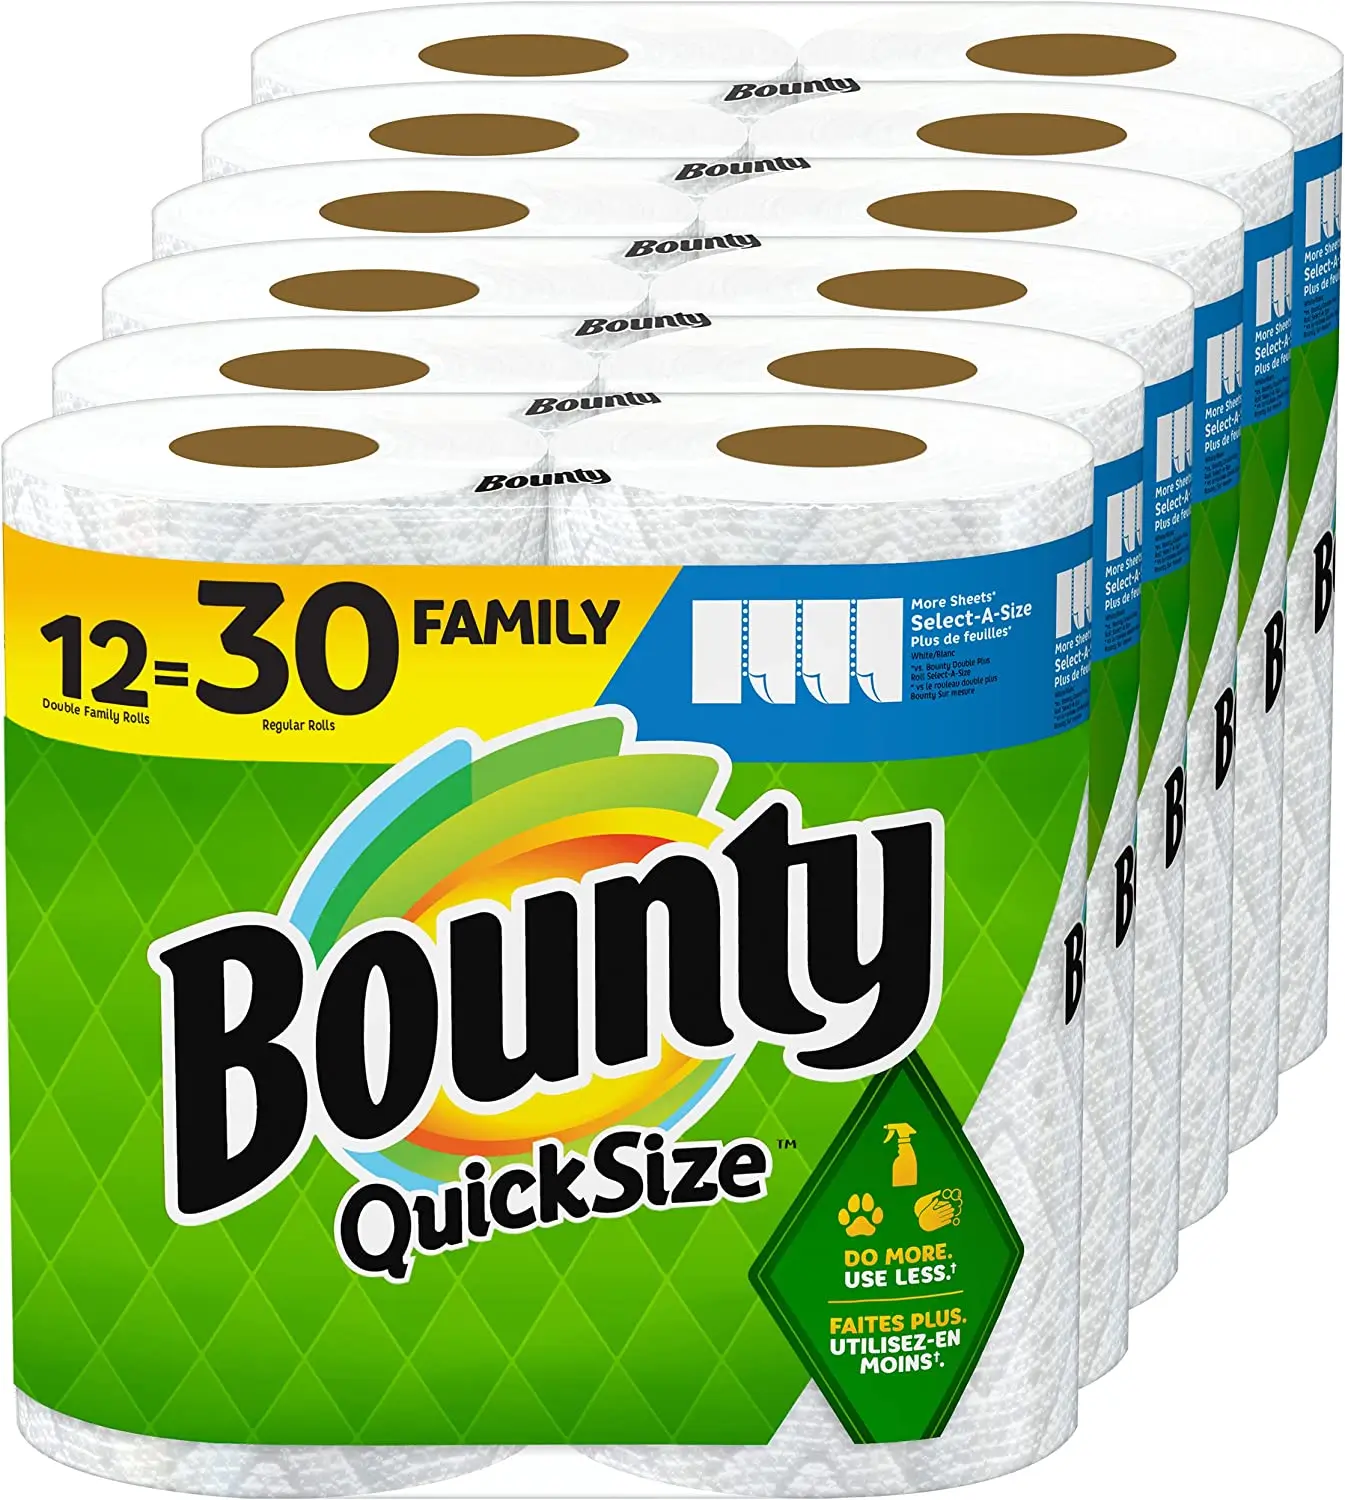 Boun't'y Quick-size Paper Towels,White,12 Family Rolls = 30 Regular ...